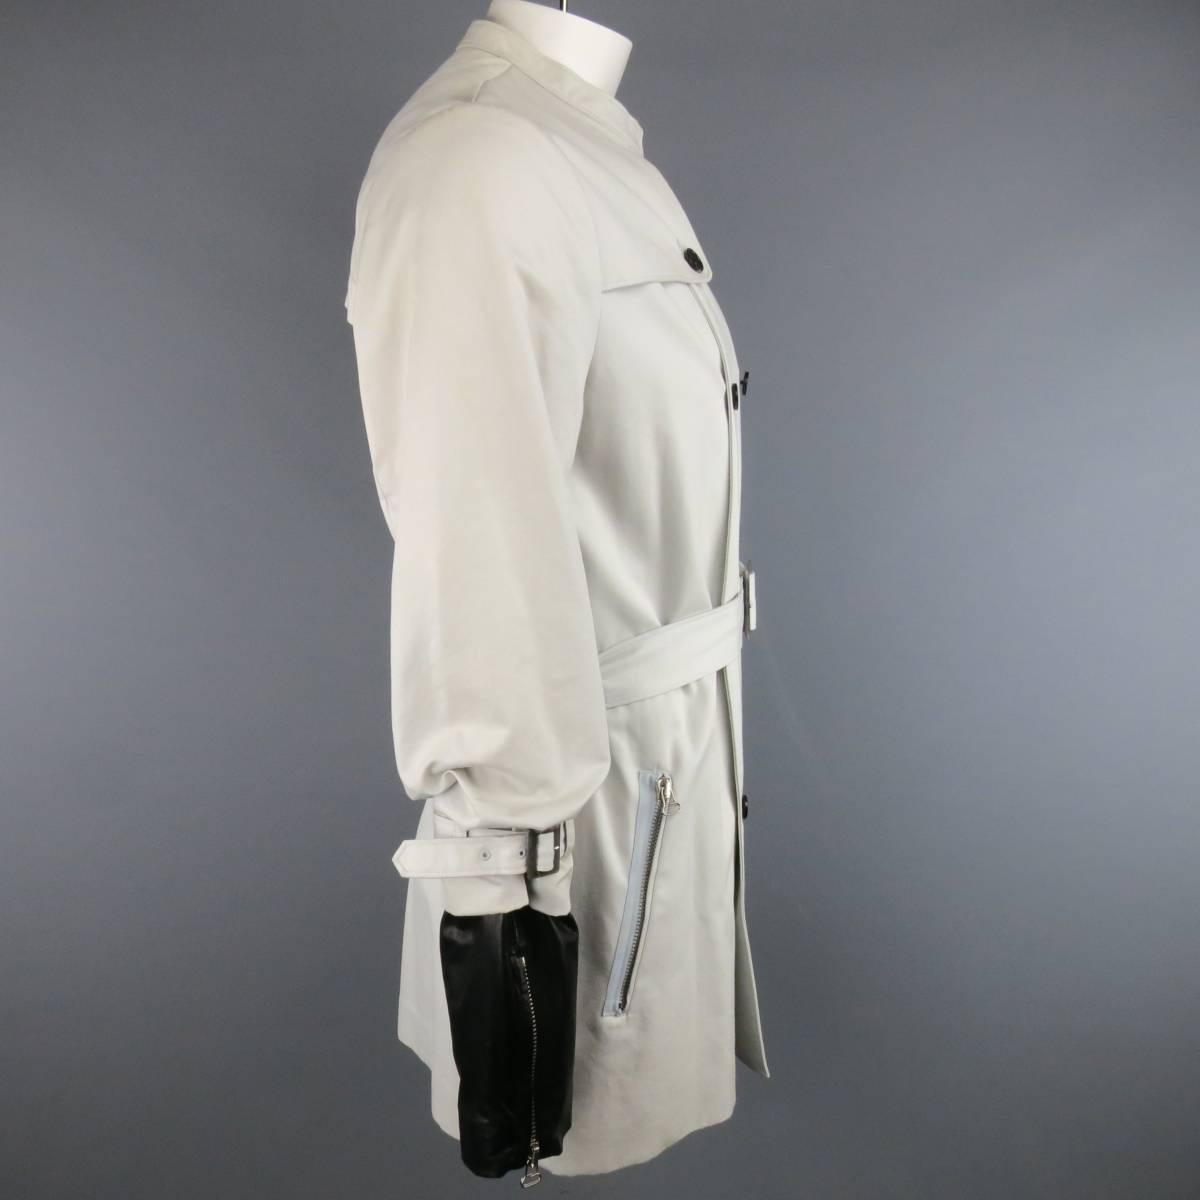 This unique 3.1 PHILLIP LIM trench coat comes in a light khaki cotton twill and features a band collar with hook eye closure, double breasted button closure, storm flap detail, slanted zip pockets, belted waist, and detachable leather zip biker